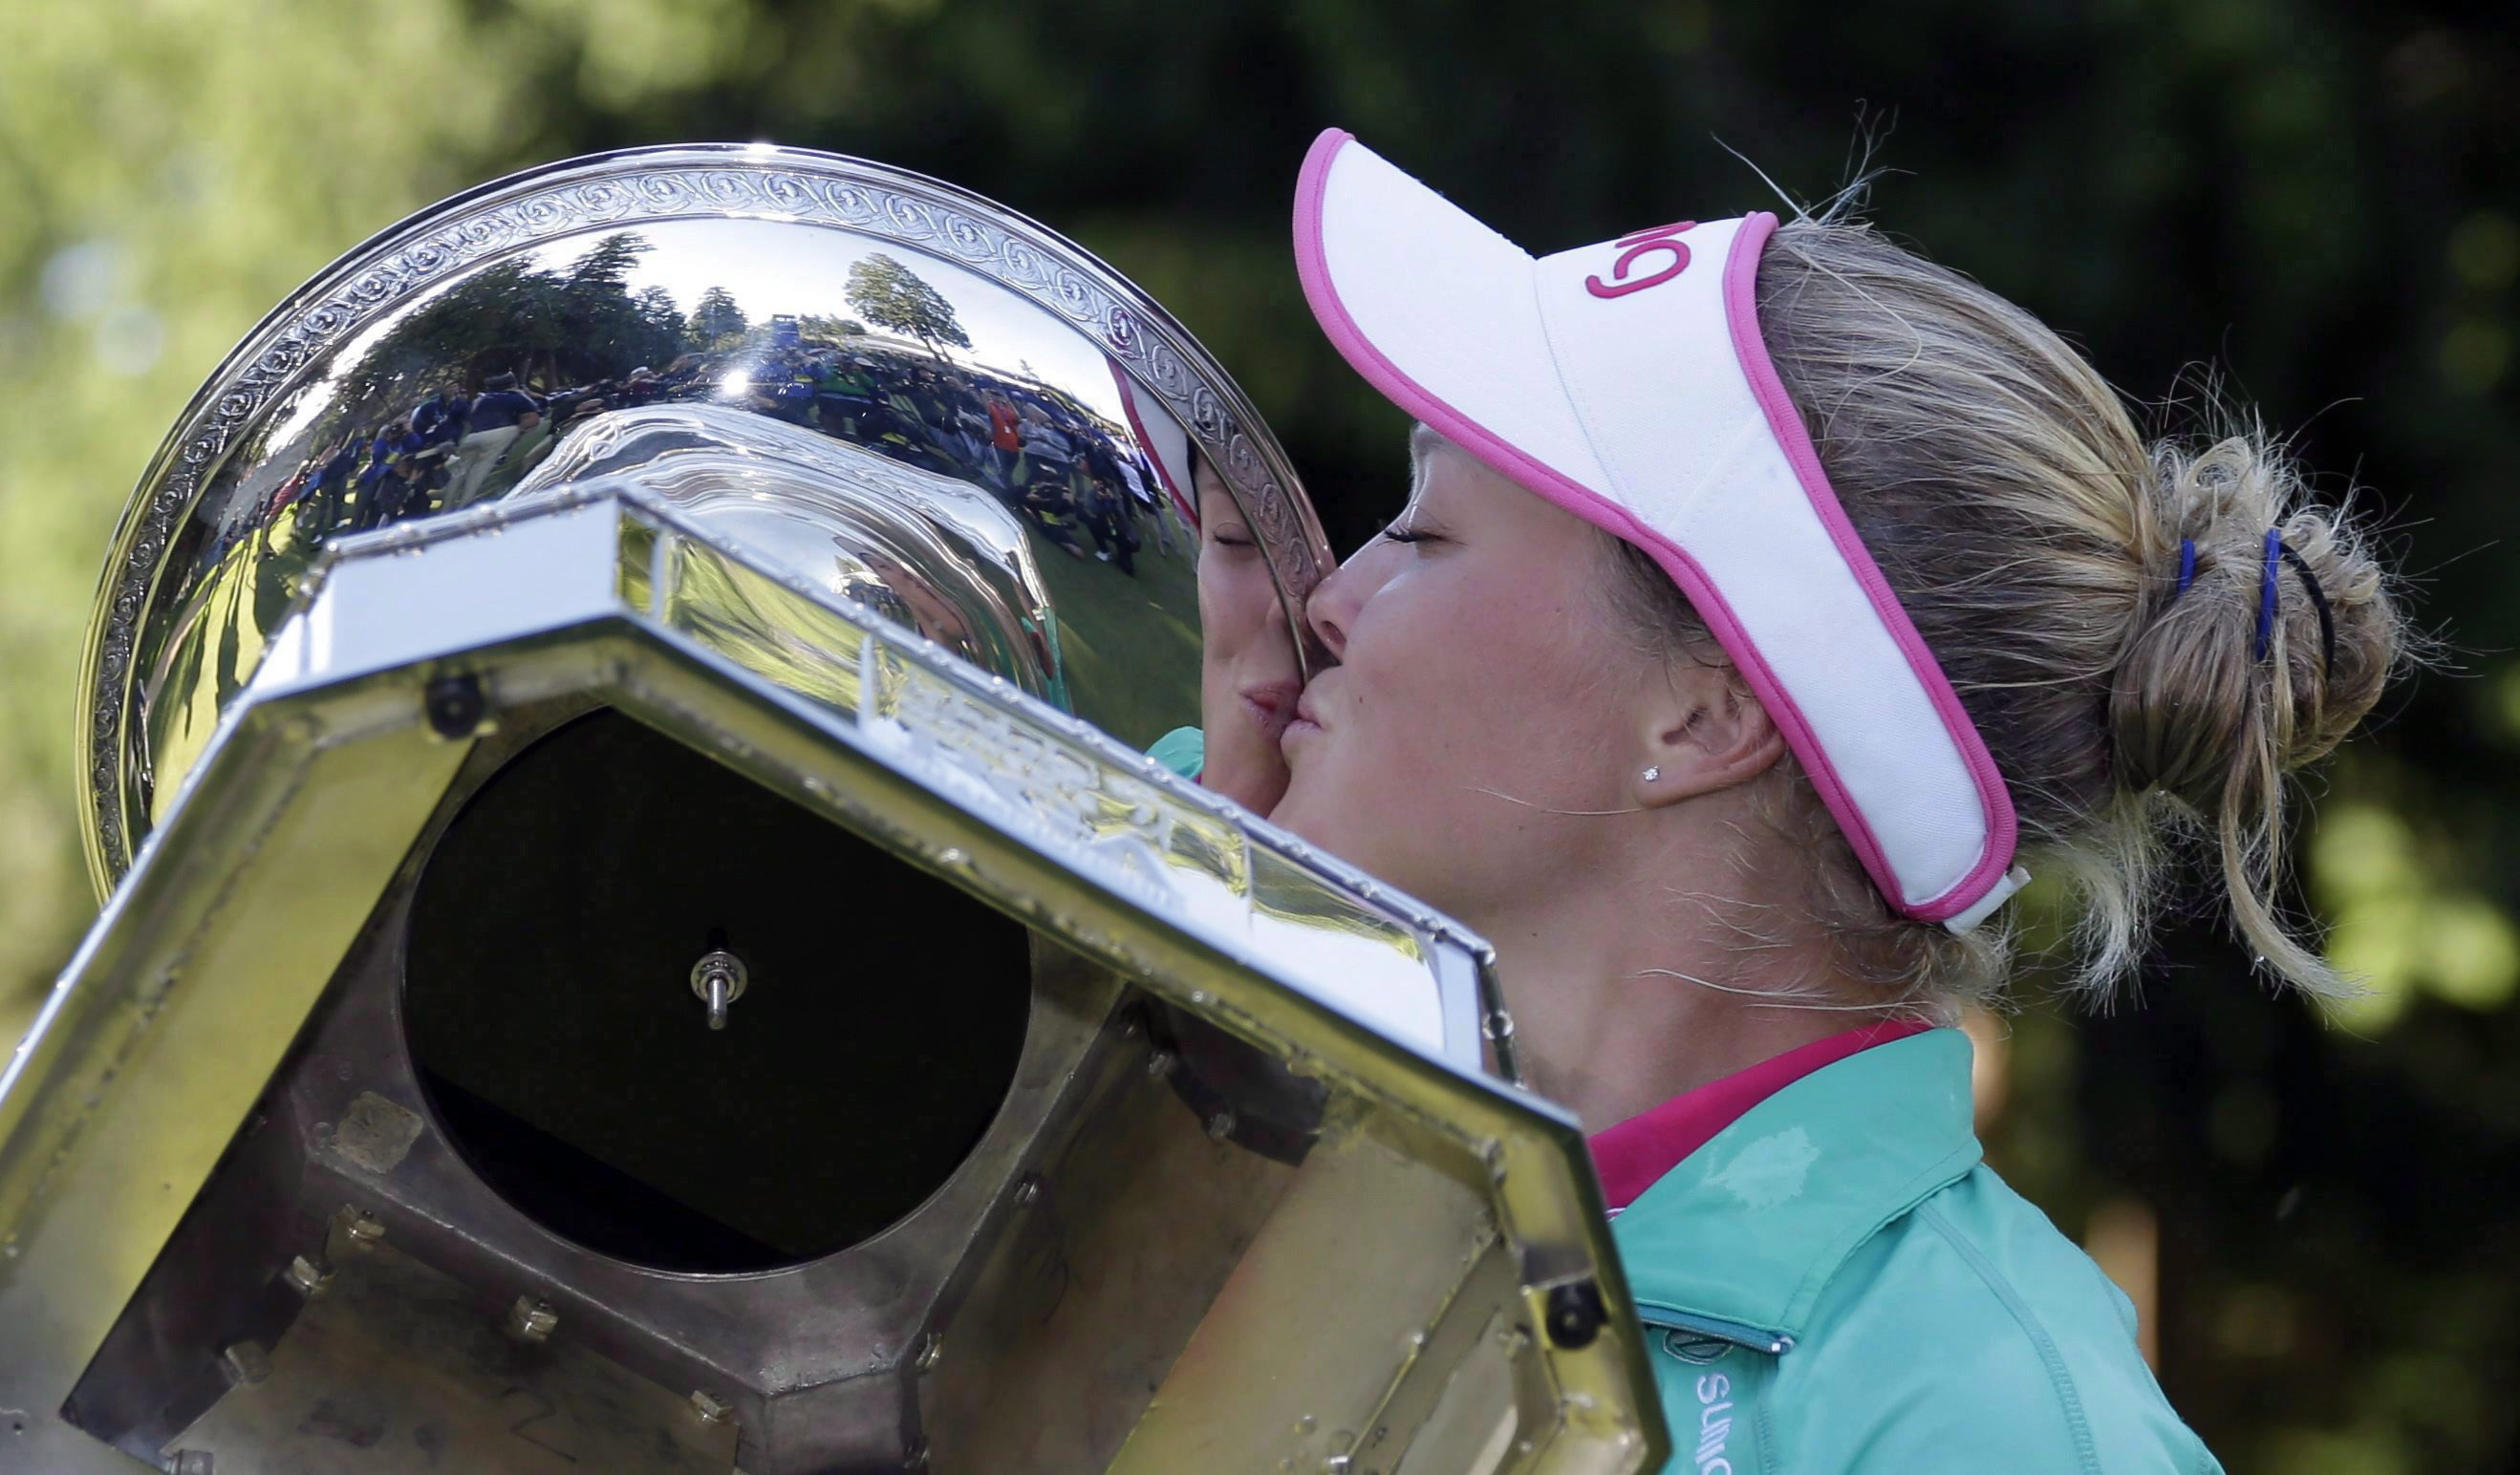 After being prompted by organizers, Brooke Henderson, of Canada, plants a kiss on the championship trophy after winning the Women's PGA Championship golf tournament at Sahalee Country Club on Sunday, June 12, 2016, in Sammamish, Washington. The 19-year-old from Smiths Falls, Ont., packed more into one season than some golfers experience over an entire career. THE CANADIAN PRESS/AP, Elaine Thompson